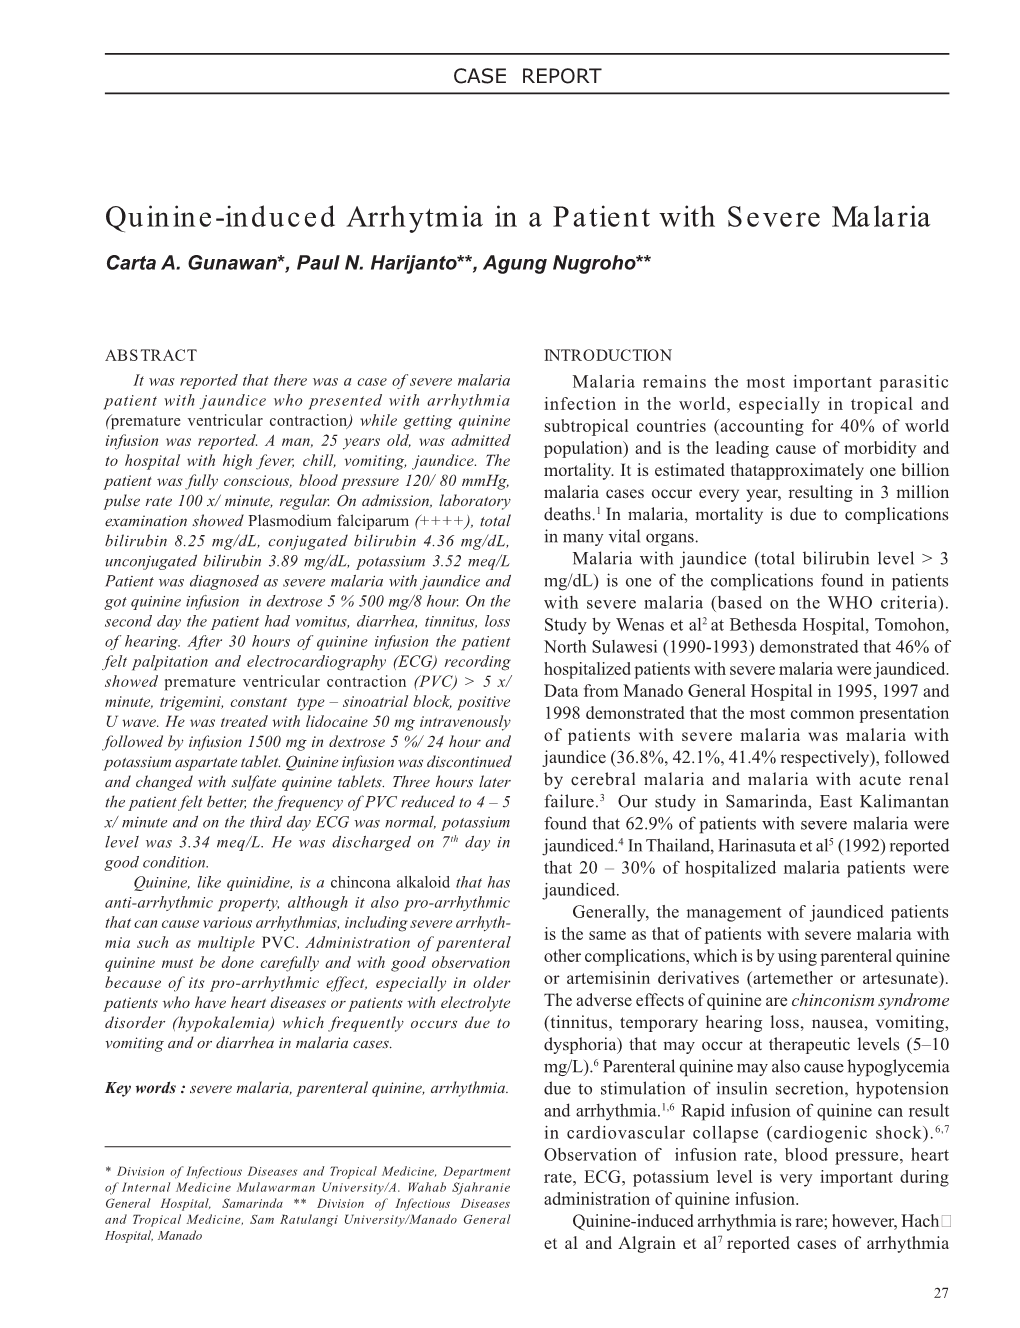 Quinine-Induced Arrhytmia in a Patient with Severe Malaria